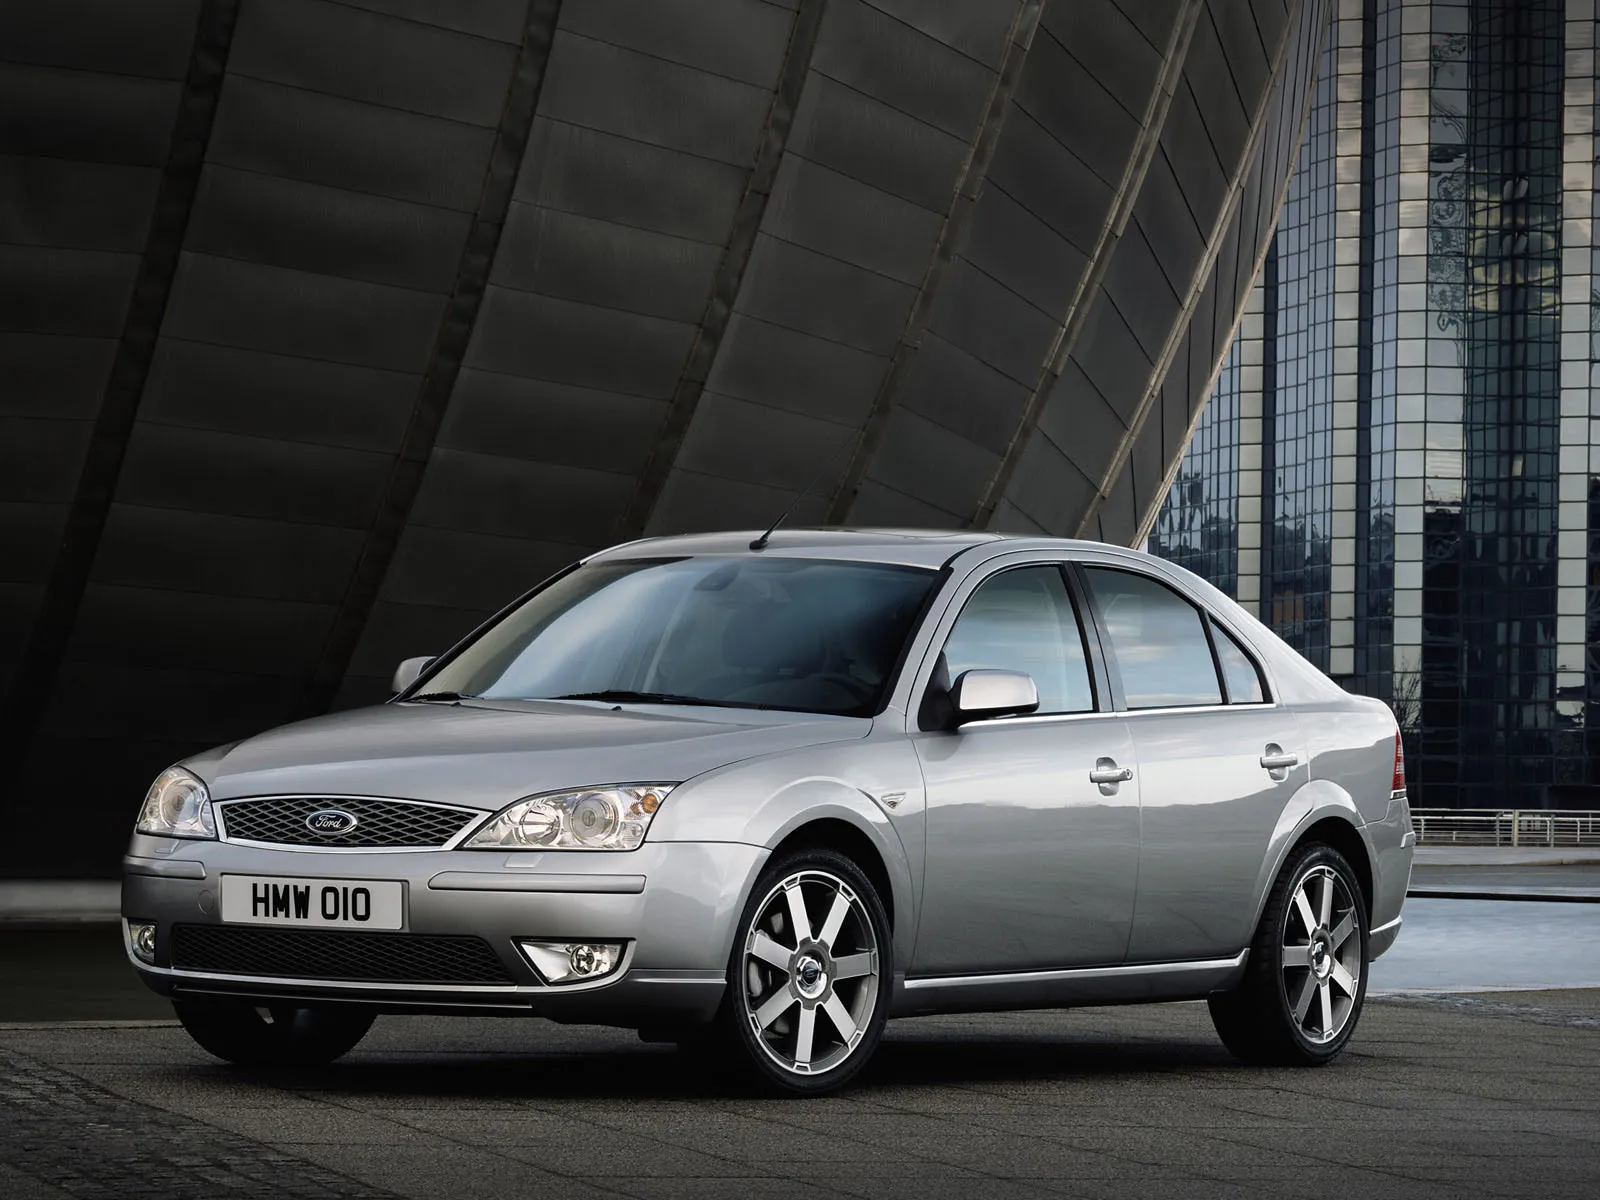 Ford Mondeo 2.2 2005 photo - 1